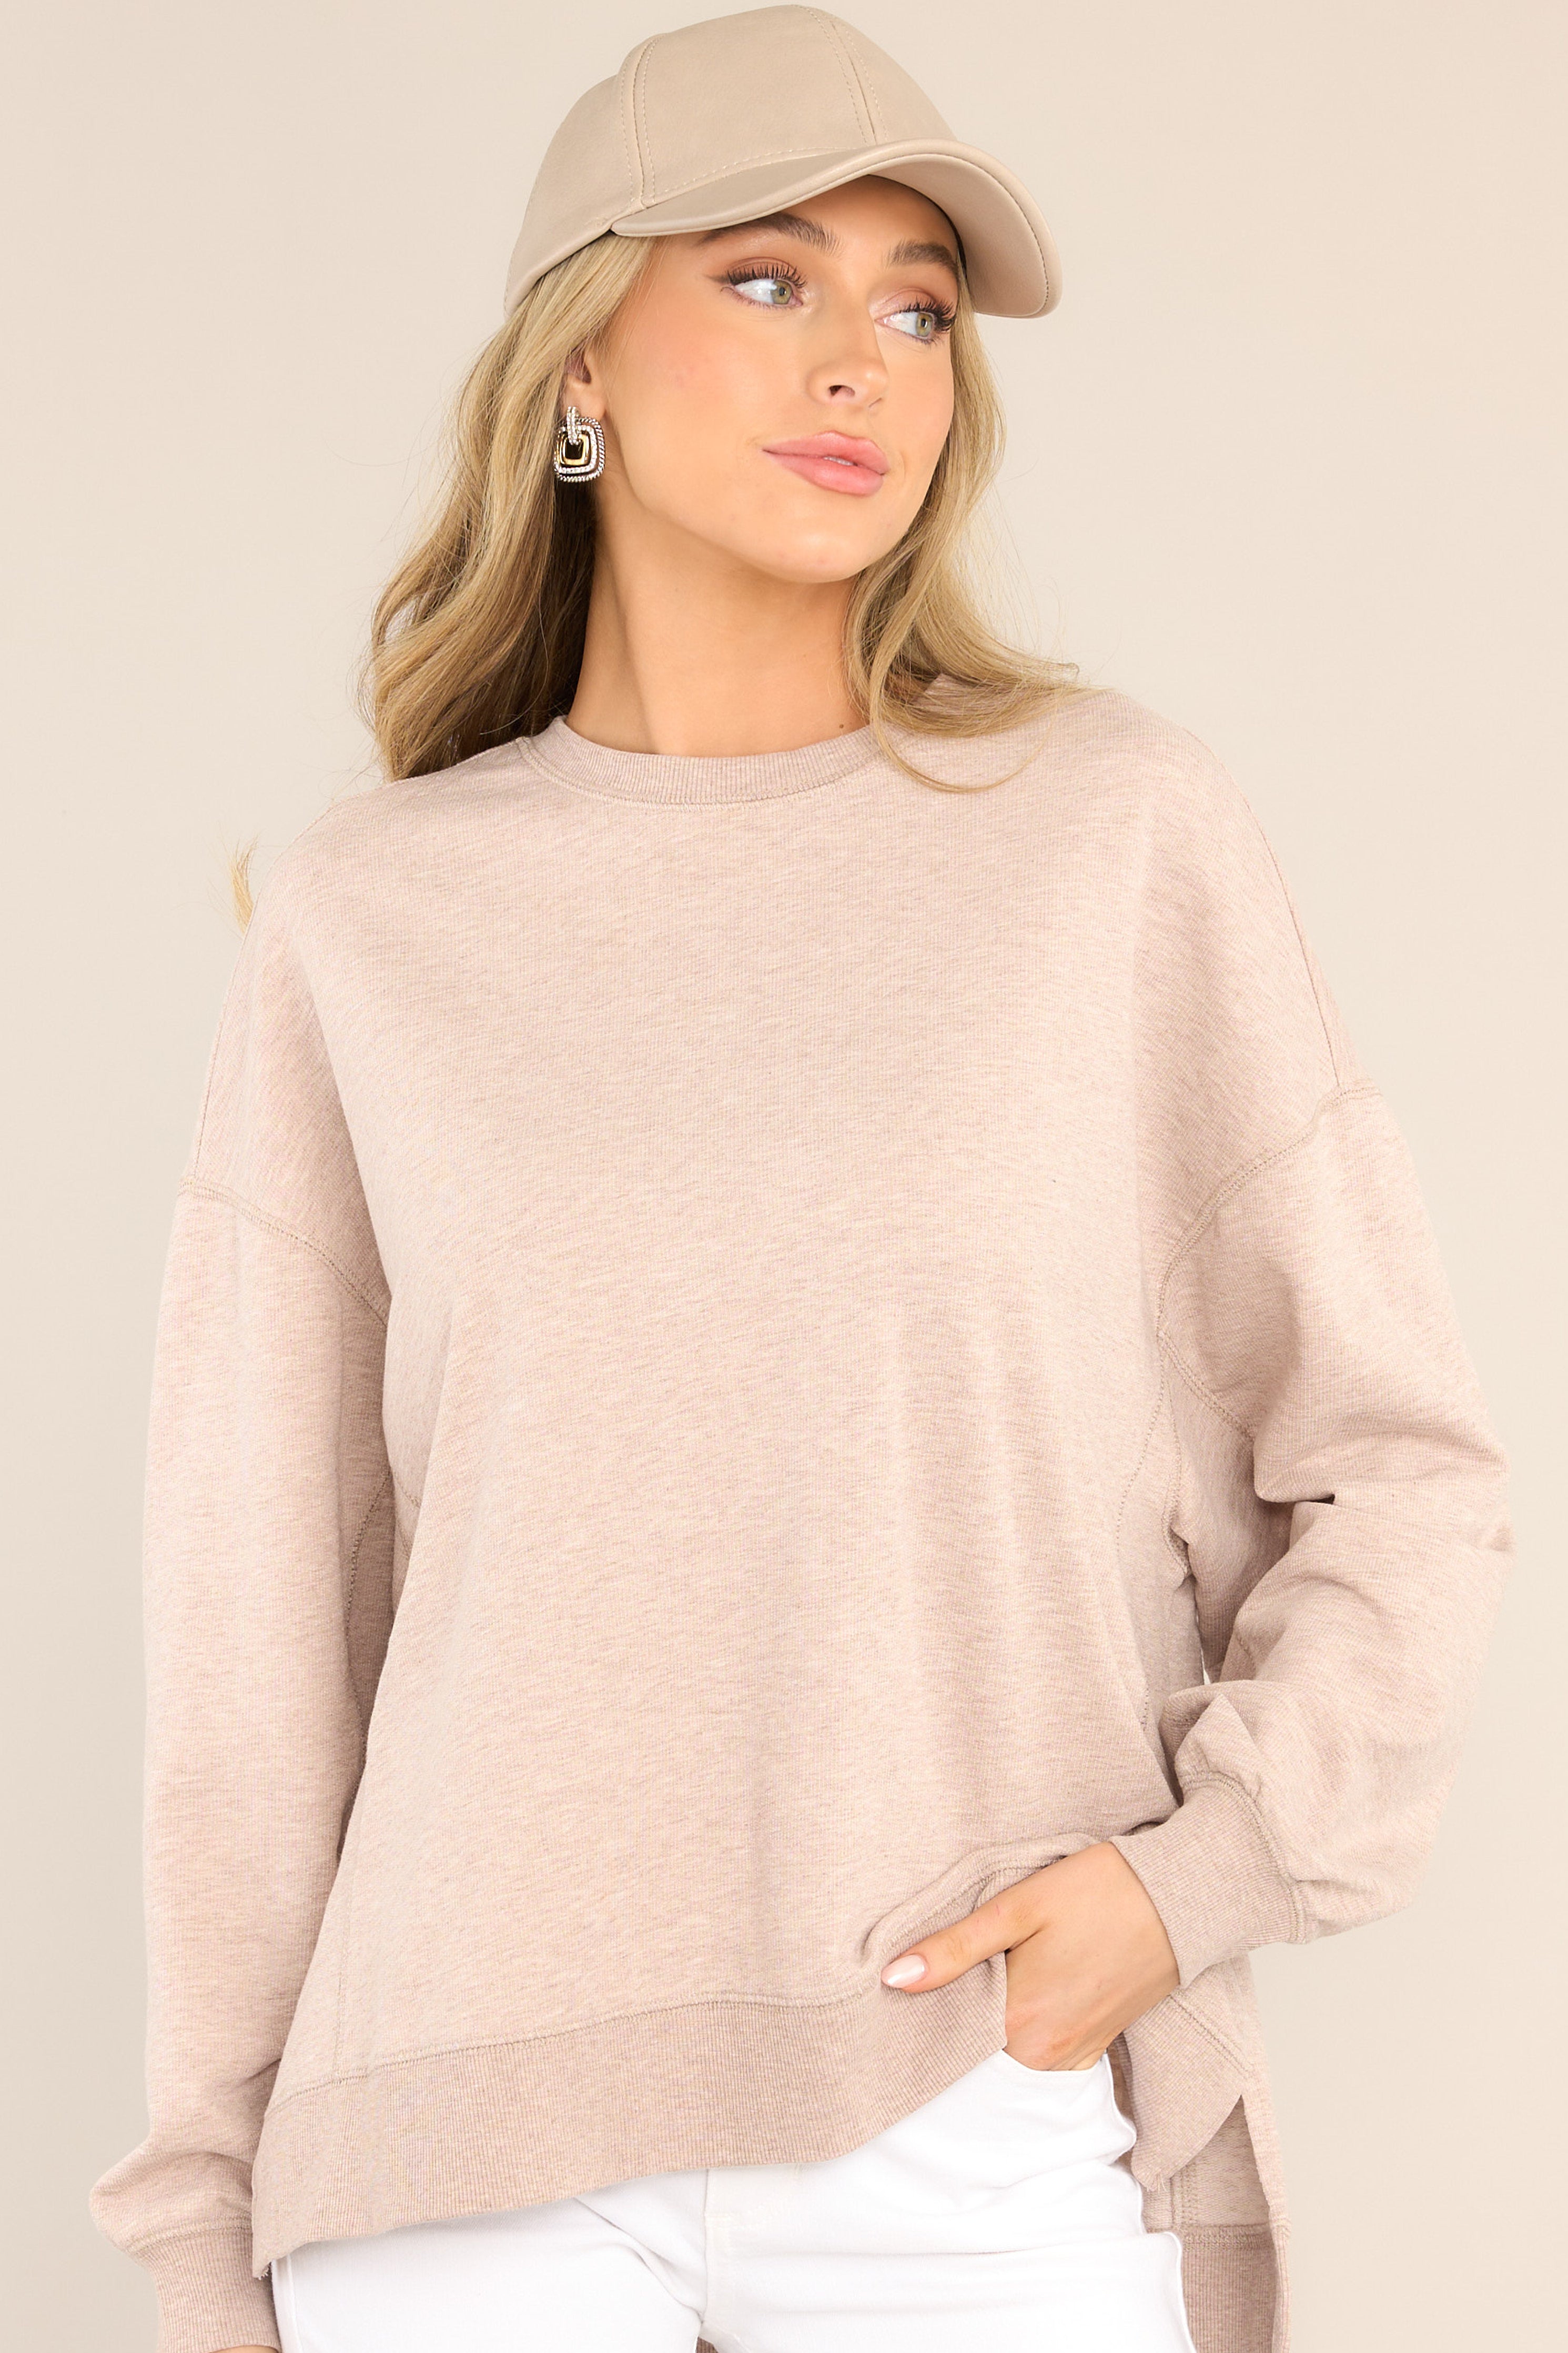 Front view of this top that features a crew neckline, dropped shoulders, ribbed cuffed sleeves, and a high-low split hemline.